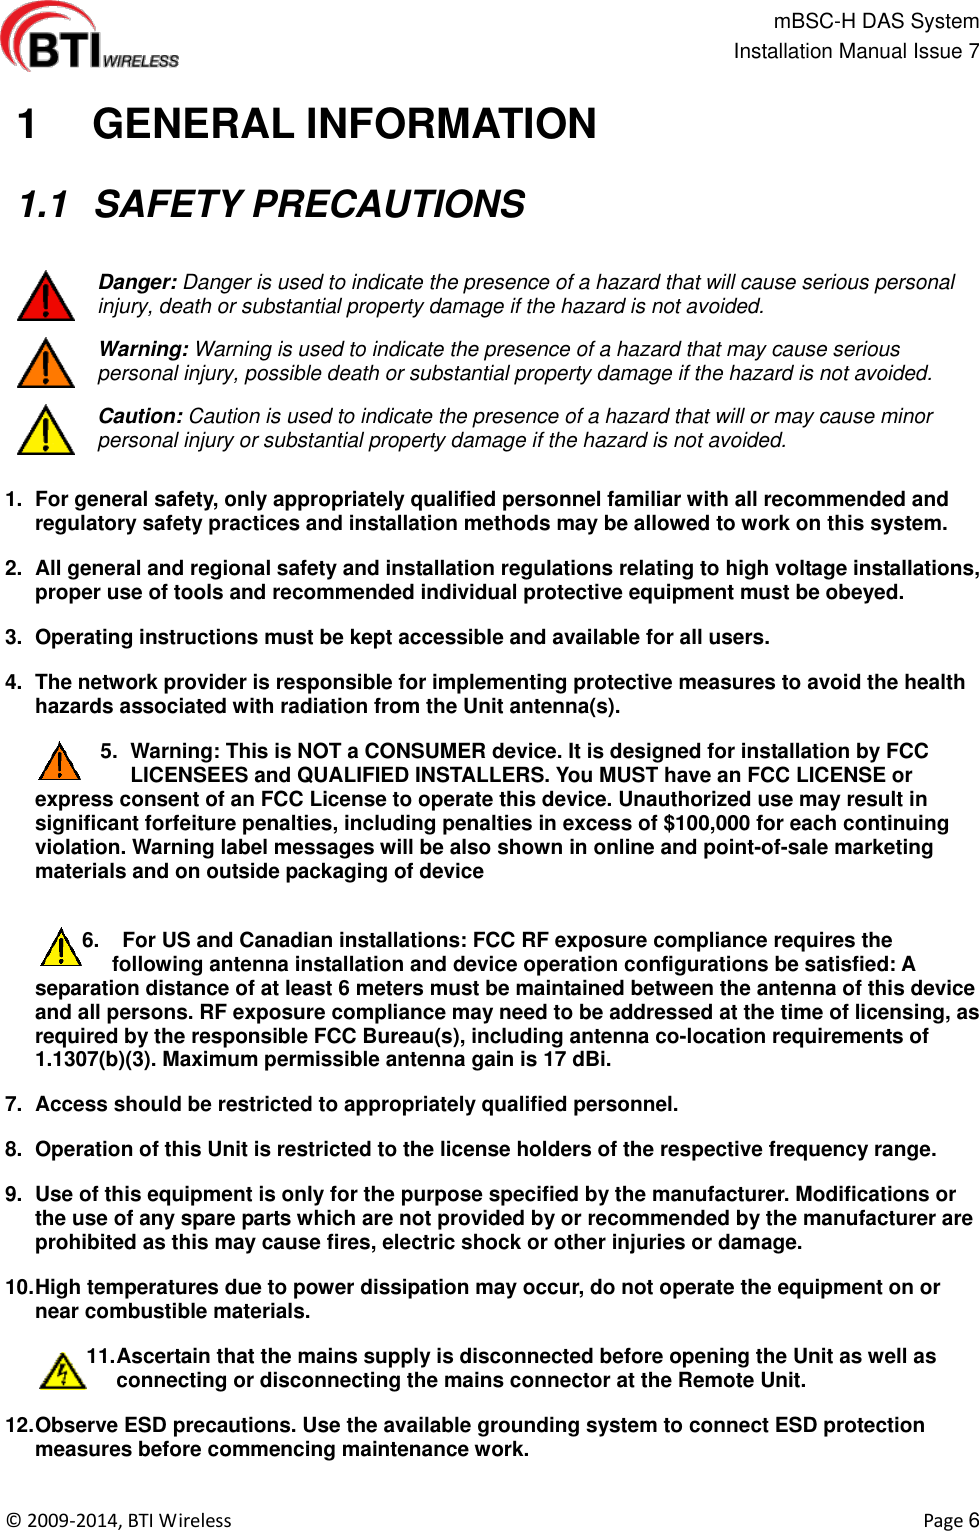                                                   mBSC-H DAS System   Installation Manual Issue 7  ©  2009-2014, BTI Wireless    Page 6   1   GENERAL INFORMATION   1.1  SAFETY PRECAUTIONS   Danger: Danger is used to indicate the presence of a hazard that will cause serious personal injury, death or substantial property damage if the hazard is not avoided.  Warning: Warning is used to indicate the presence of a hazard that may cause serious personal injury, possible death or substantial property damage if the hazard is not avoided.  Caution: Caution is used to indicate the presence of a hazard that will or may cause minor personal injury or substantial property damage if the hazard is not avoided.  1.  For general safety, only appropriately qualified personnel familiar with all recommended and regulatory safety practices and installation methods may be allowed to work on this system.   2.  All general and regional safety and installation regulations relating to high voltage installations, proper use of tools and recommended individual protective equipment must be obeyed. 3.  Operating instructions must be kept accessible and available for all users. 4.  The network provider is responsible for implementing protective measures to avoid the health hazards associated with radiation from the Unit antenna(s). 5.  Warning: This is NOT a CONSUMER device. It is designed for installation by FCC LICENSEES and QUALIFIED INSTALLERS. You MUST have an FCC LICENSE or express consent of an FCC License to operate this device. Unauthorized use may result in significant forfeiture penalties, including penalties in excess of $100,000 for each continuing violation. Warning label messages will be also shown in online and point-of-sale marketing materials and on outside packaging of device  6.    For US and Canadian installations: FCC RF exposure compliance requires the following antenna installation and device operation configurations be satisfied: A separation distance of at least 6 meters must be maintained between the antenna of this device and all persons. RF exposure compliance may need to be addressed at the time of licensing, as required by the responsible FCC Bureau(s), including antenna co-location requirements of 1.1307(b)(3). Maximum permissible antenna gain is 17 dBi. 7.  Access should be restricted to appropriately qualified personnel. 8.  Operation of this Unit is restricted to the license holders of the respective frequency range. 9.  Use of this equipment is only for the purpose specified by the manufacturer. Modifications or the use of any spare parts which are not provided by or recommended by the manufacturer are prohibited as this may cause fires, electric shock or other injuries or damage. 10. High temperatures due to power dissipation may occur, do not operate the equipment on or near combustible materials. 11. Ascertain that the mains supply is disconnected before opening the Unit as well as connecting or disconnecting the mains connector at the Remote Unit.   12. Observe ESD precautions. Use the available grounding system to connect ESD protection measures before commencing maintenance work. 